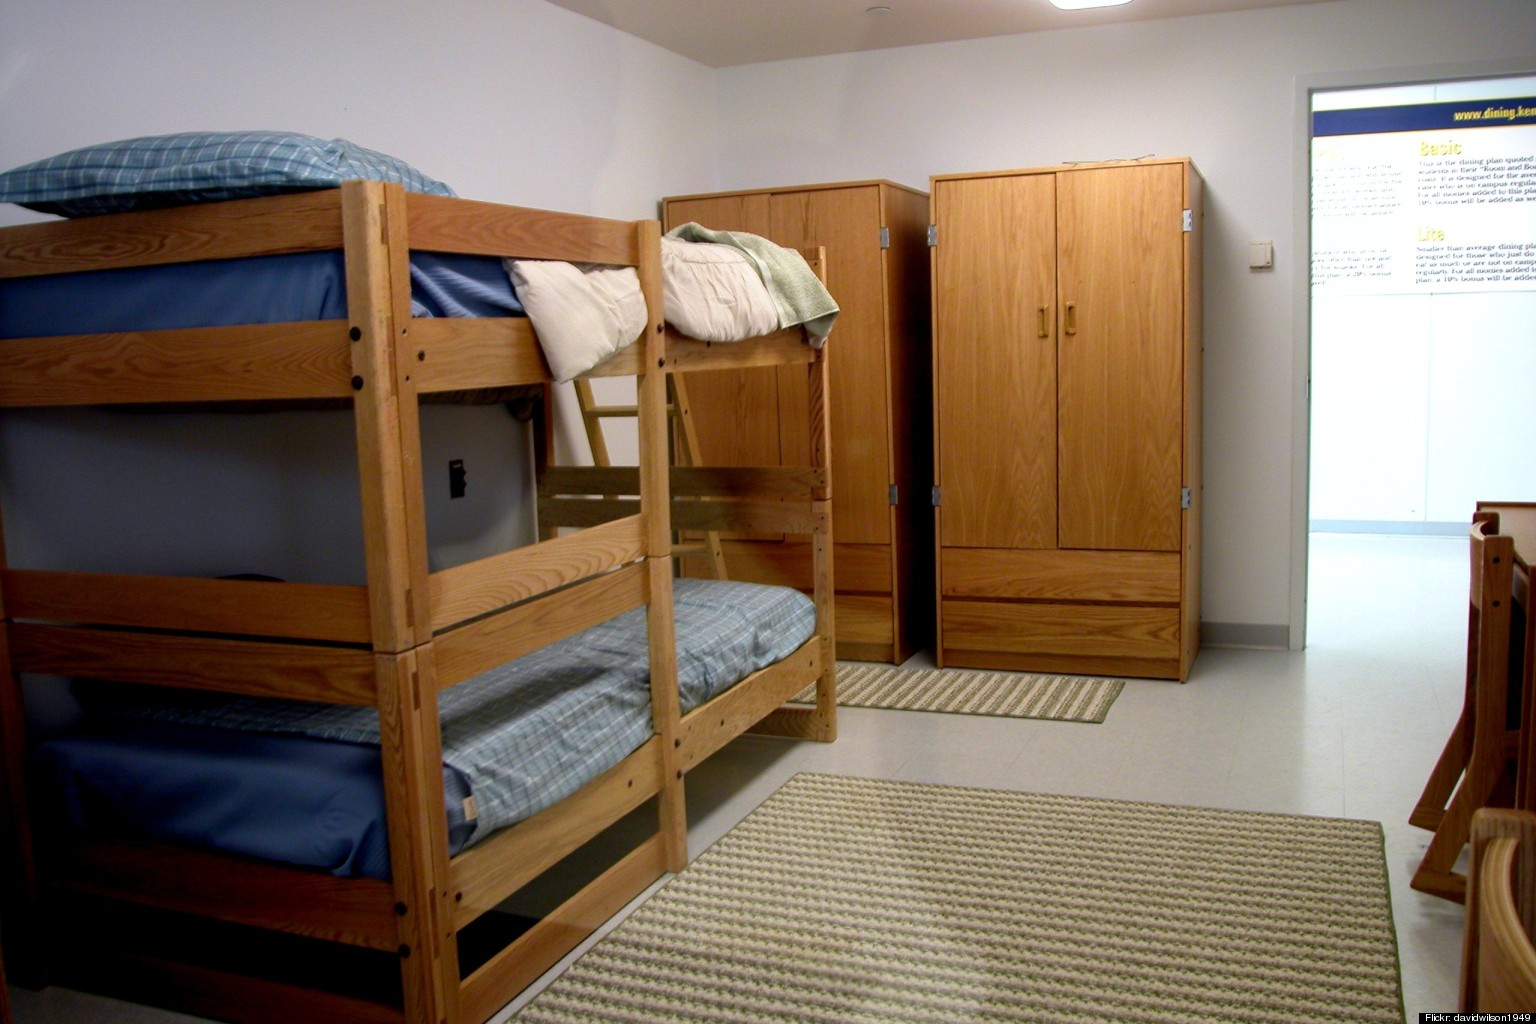 The Colleges With The Worst Dorms: Princeton Review List